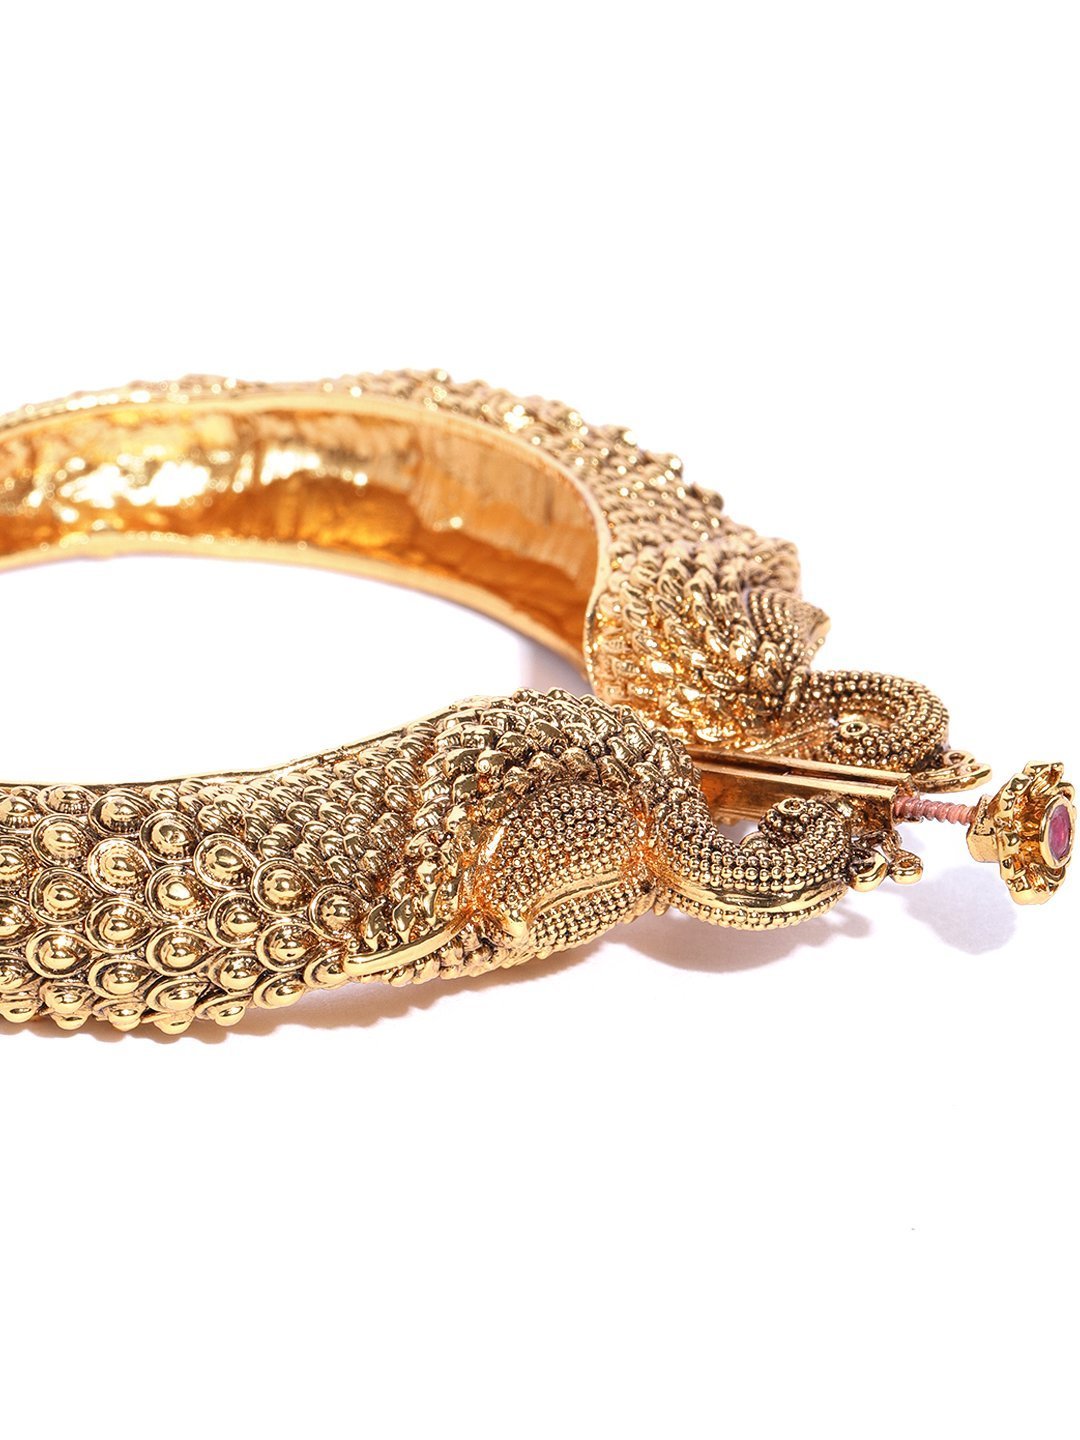 Women's Gold-Plated Ruby Studded Peacock Inspired Textured Openable Bangle - Priyaasi